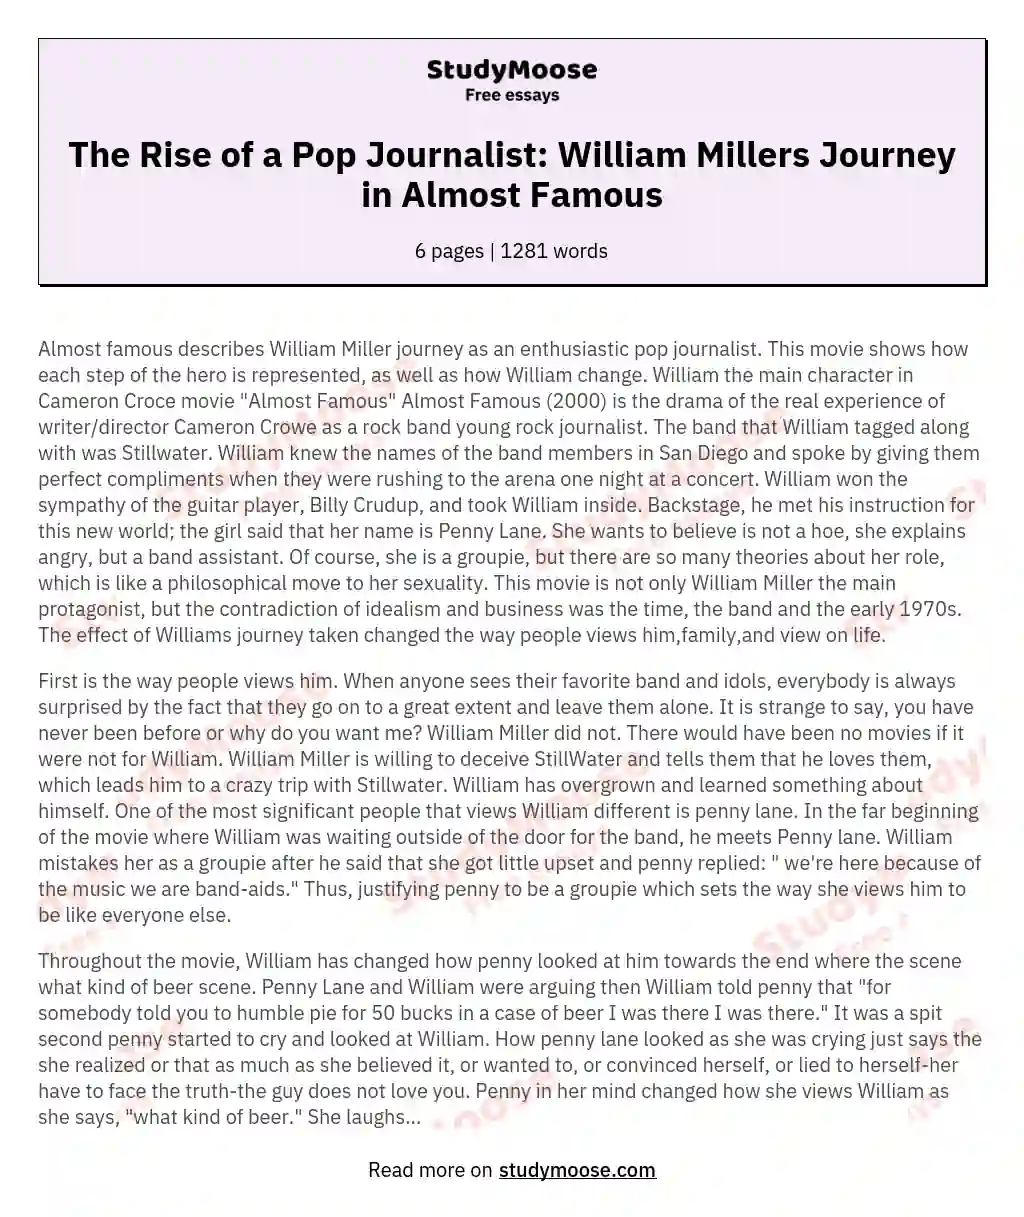 The Rise of a Pop Journalist: William Millers Journey in Almost Famous essay